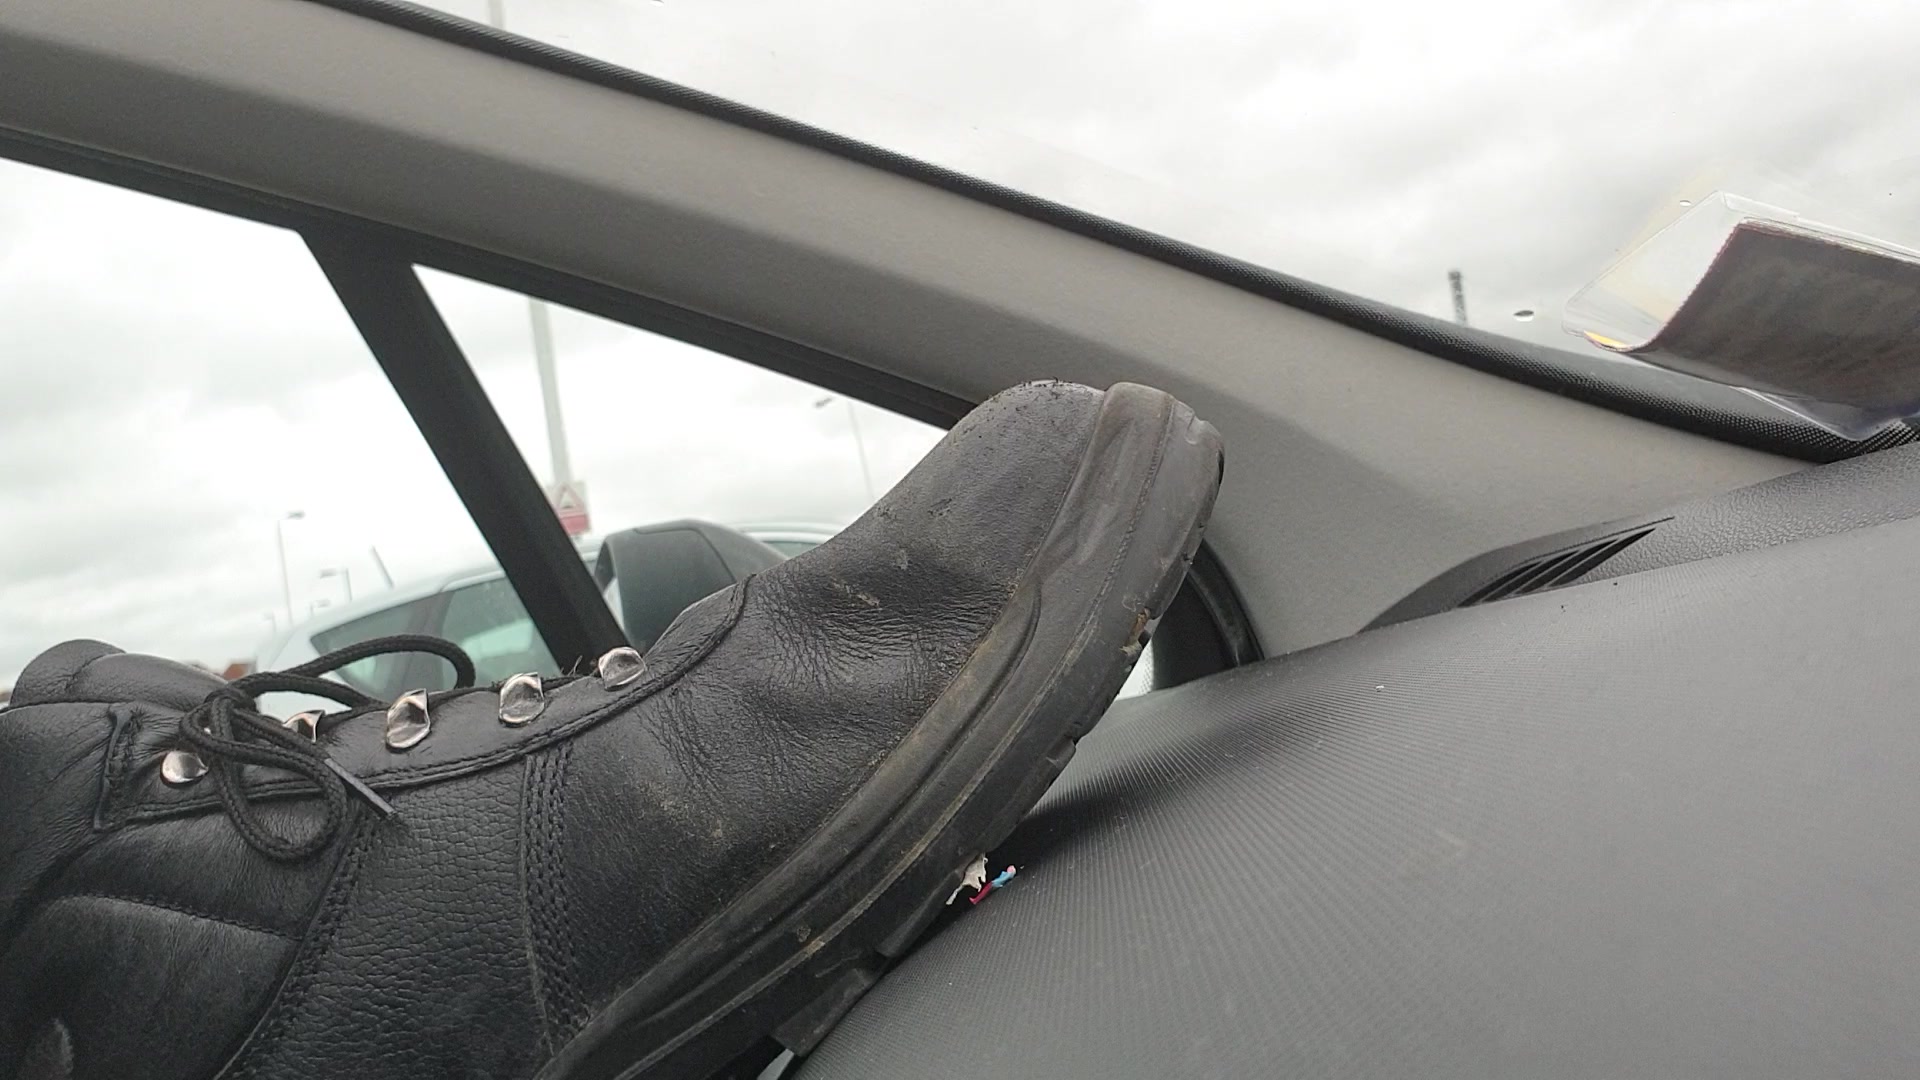 Smothered under socks in a hot car (feet)